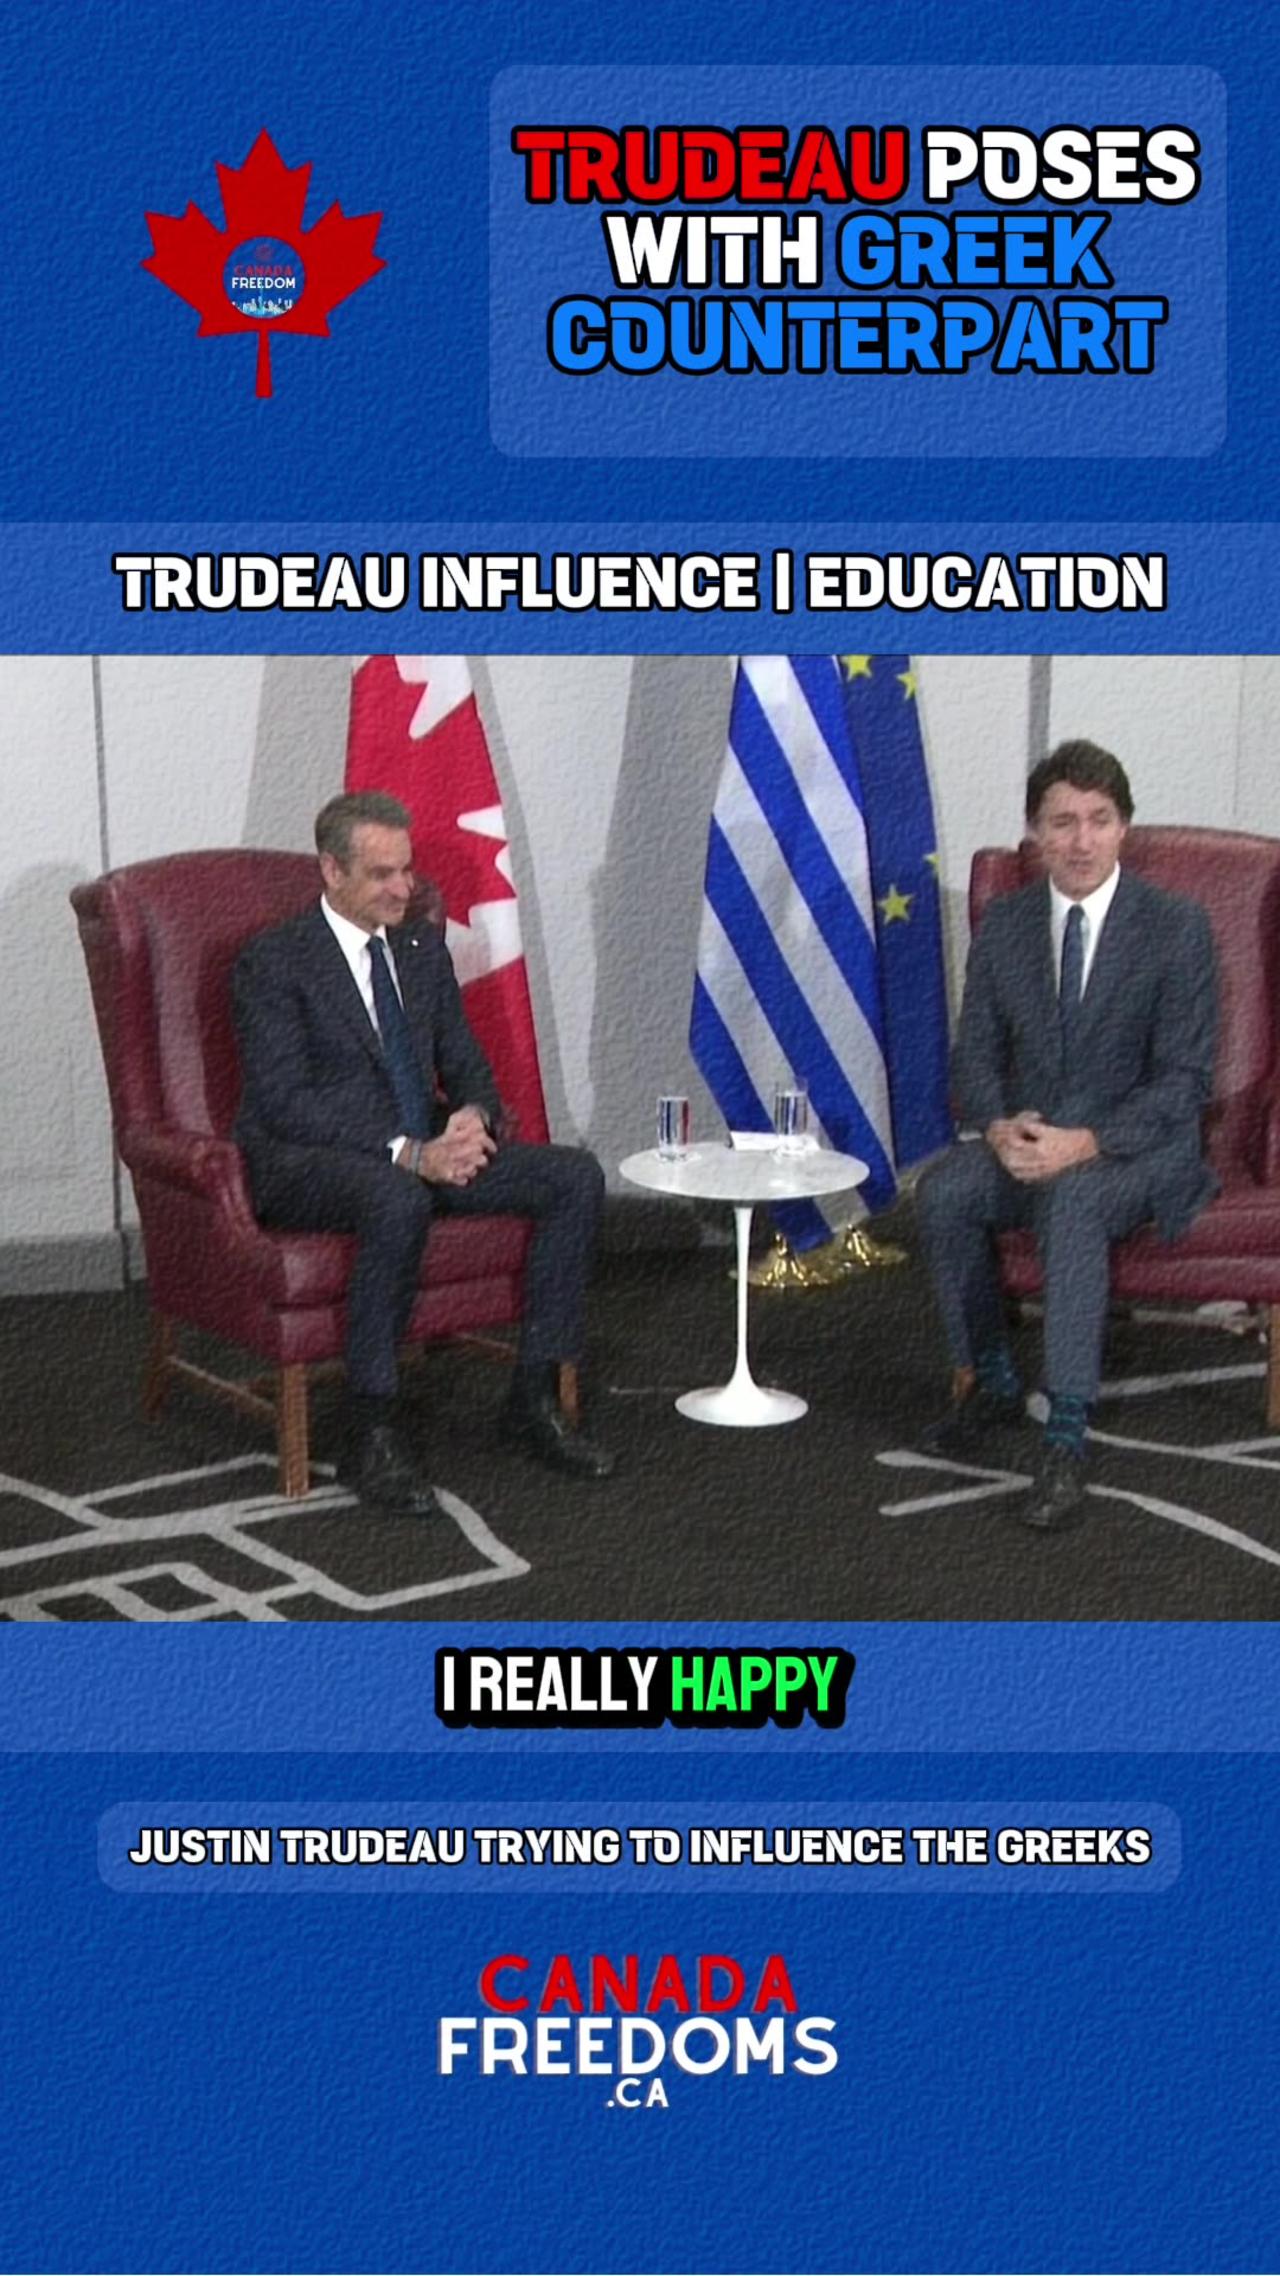 Justin Trudeau Is Trying To Influence The Greeks